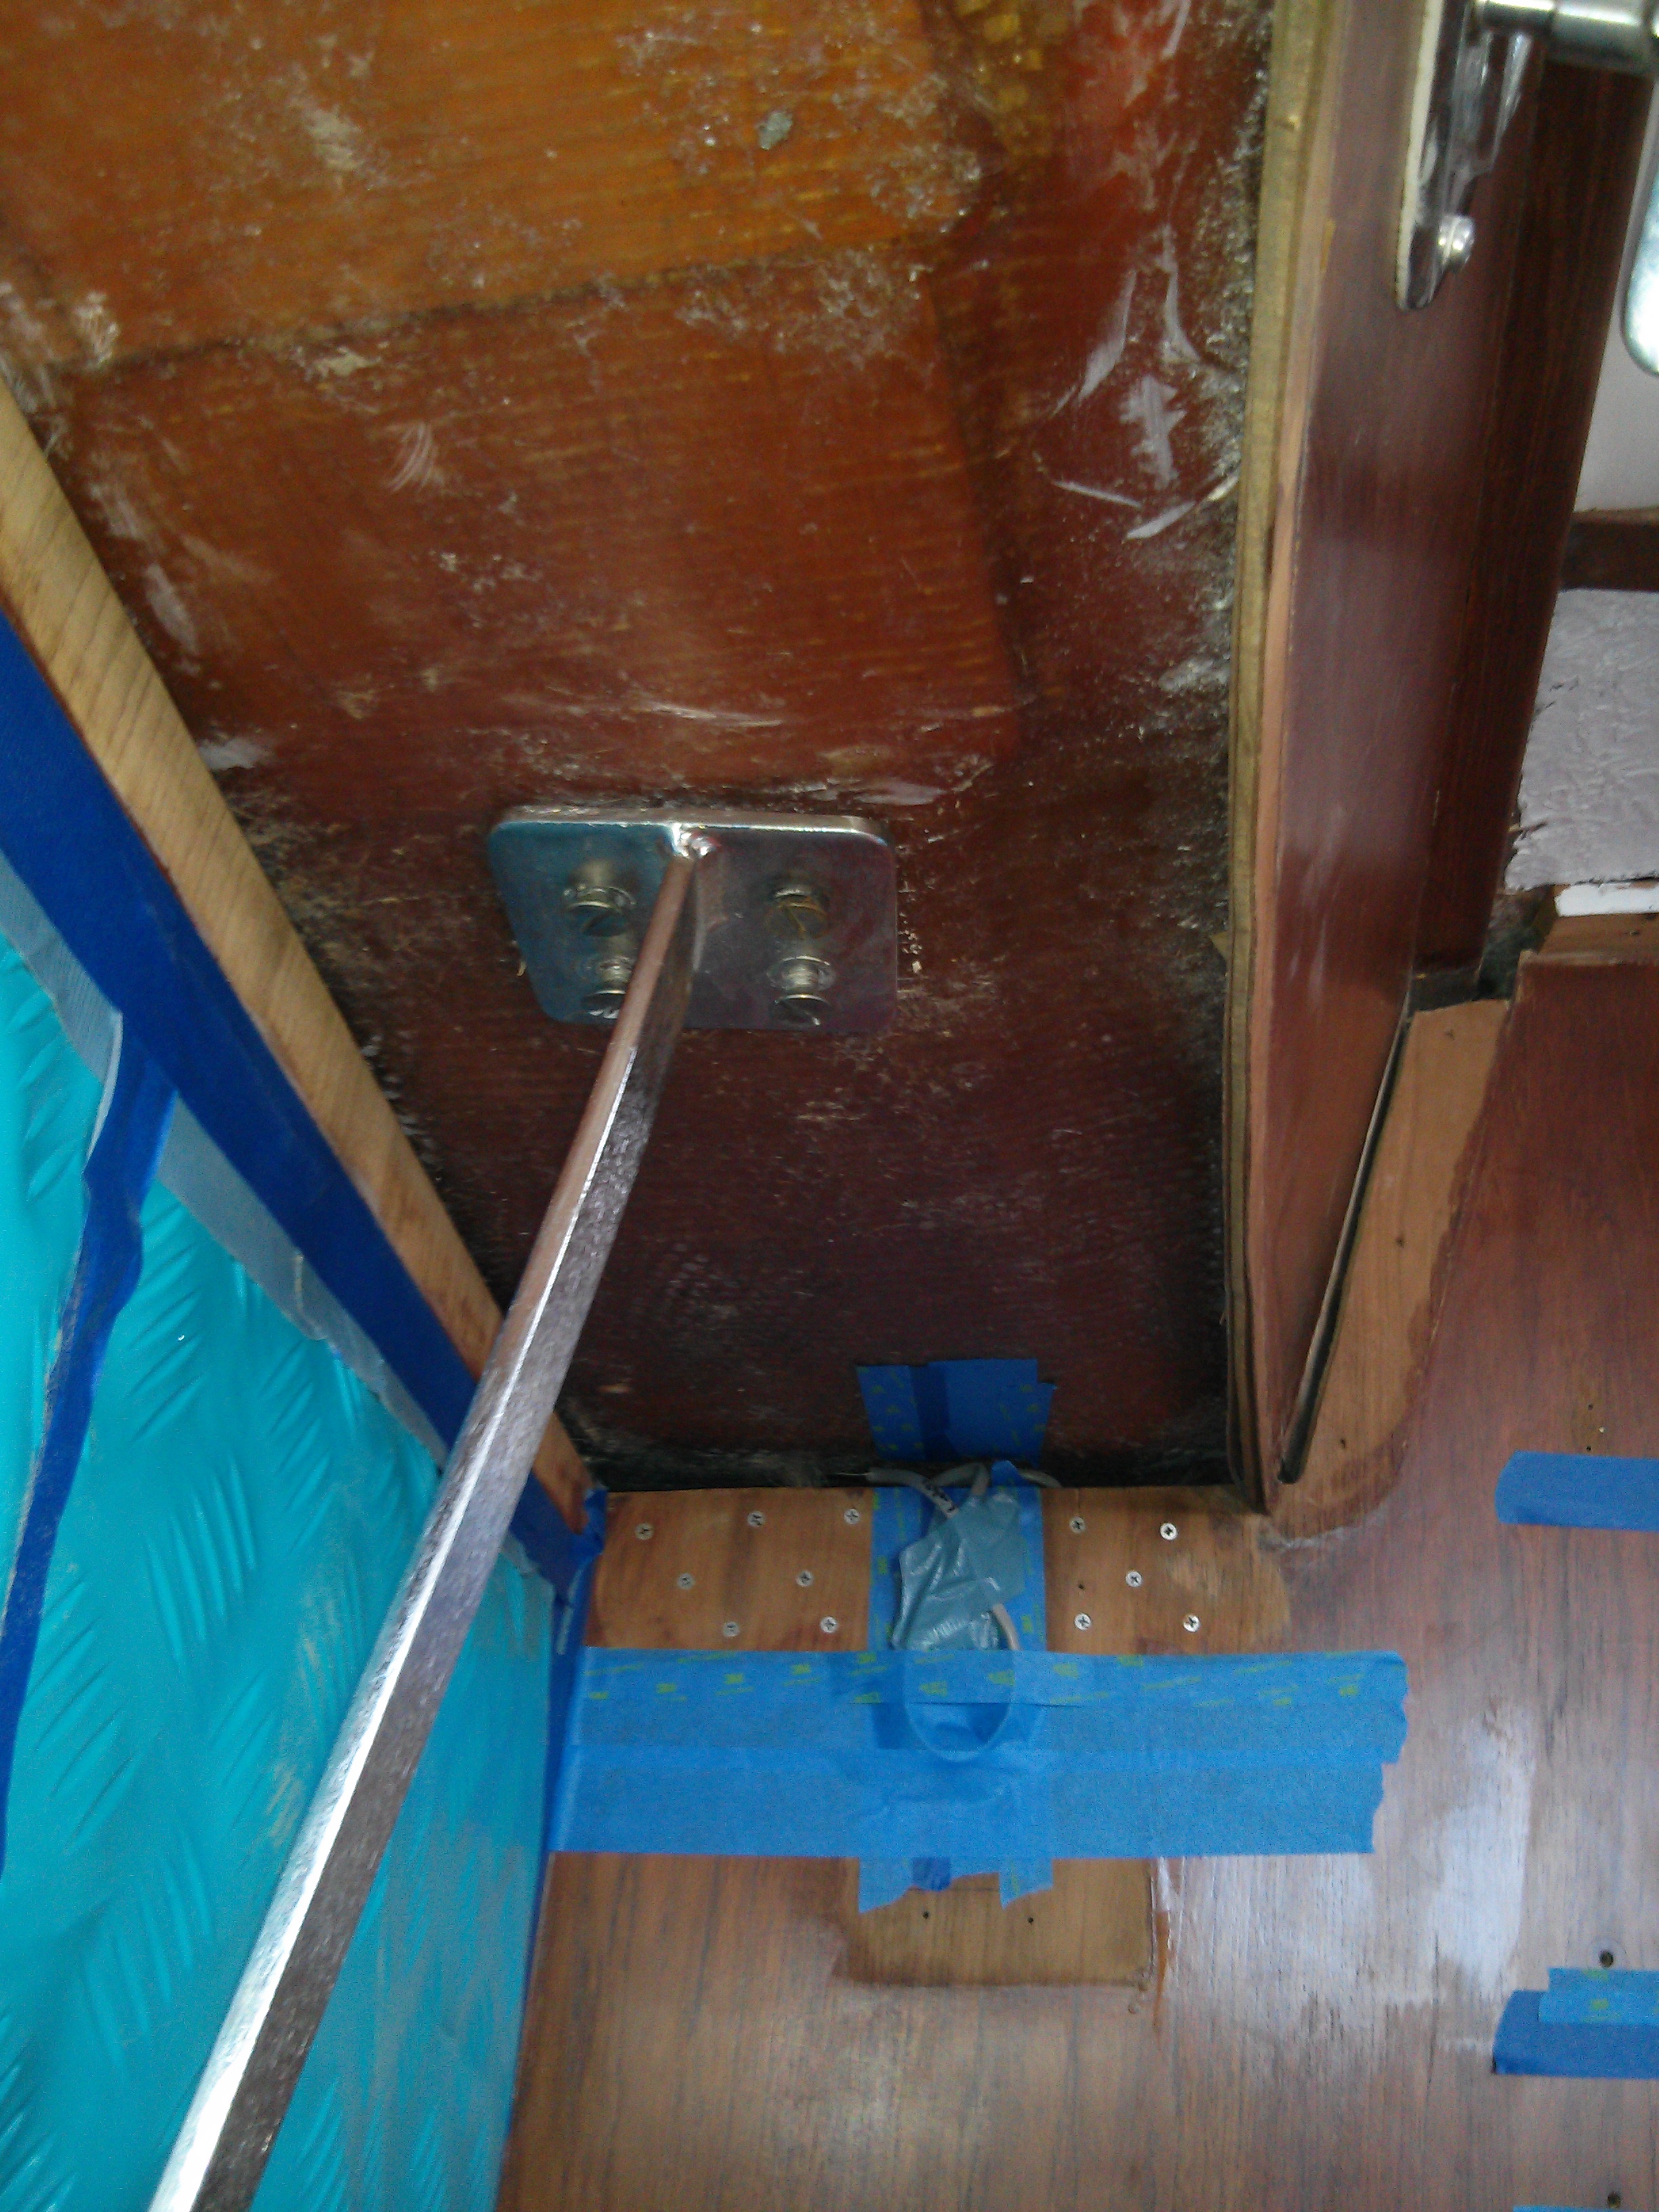 port salon overhead sanded and ready for new tabbing along bulkhead and above cabinets